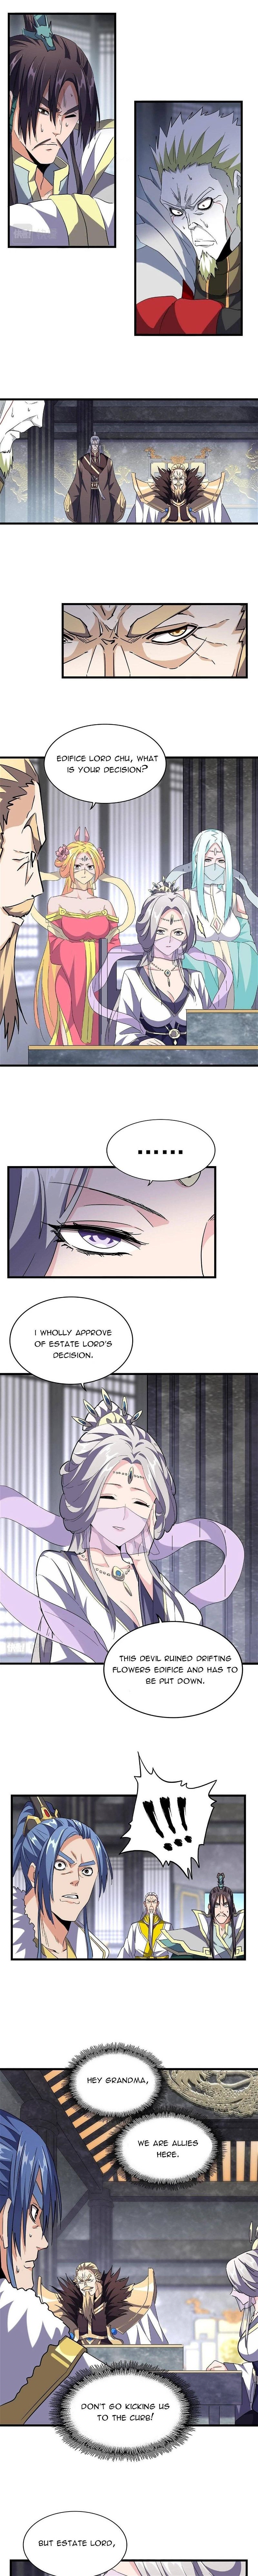 Magic Emperor Chapter 220 page 1